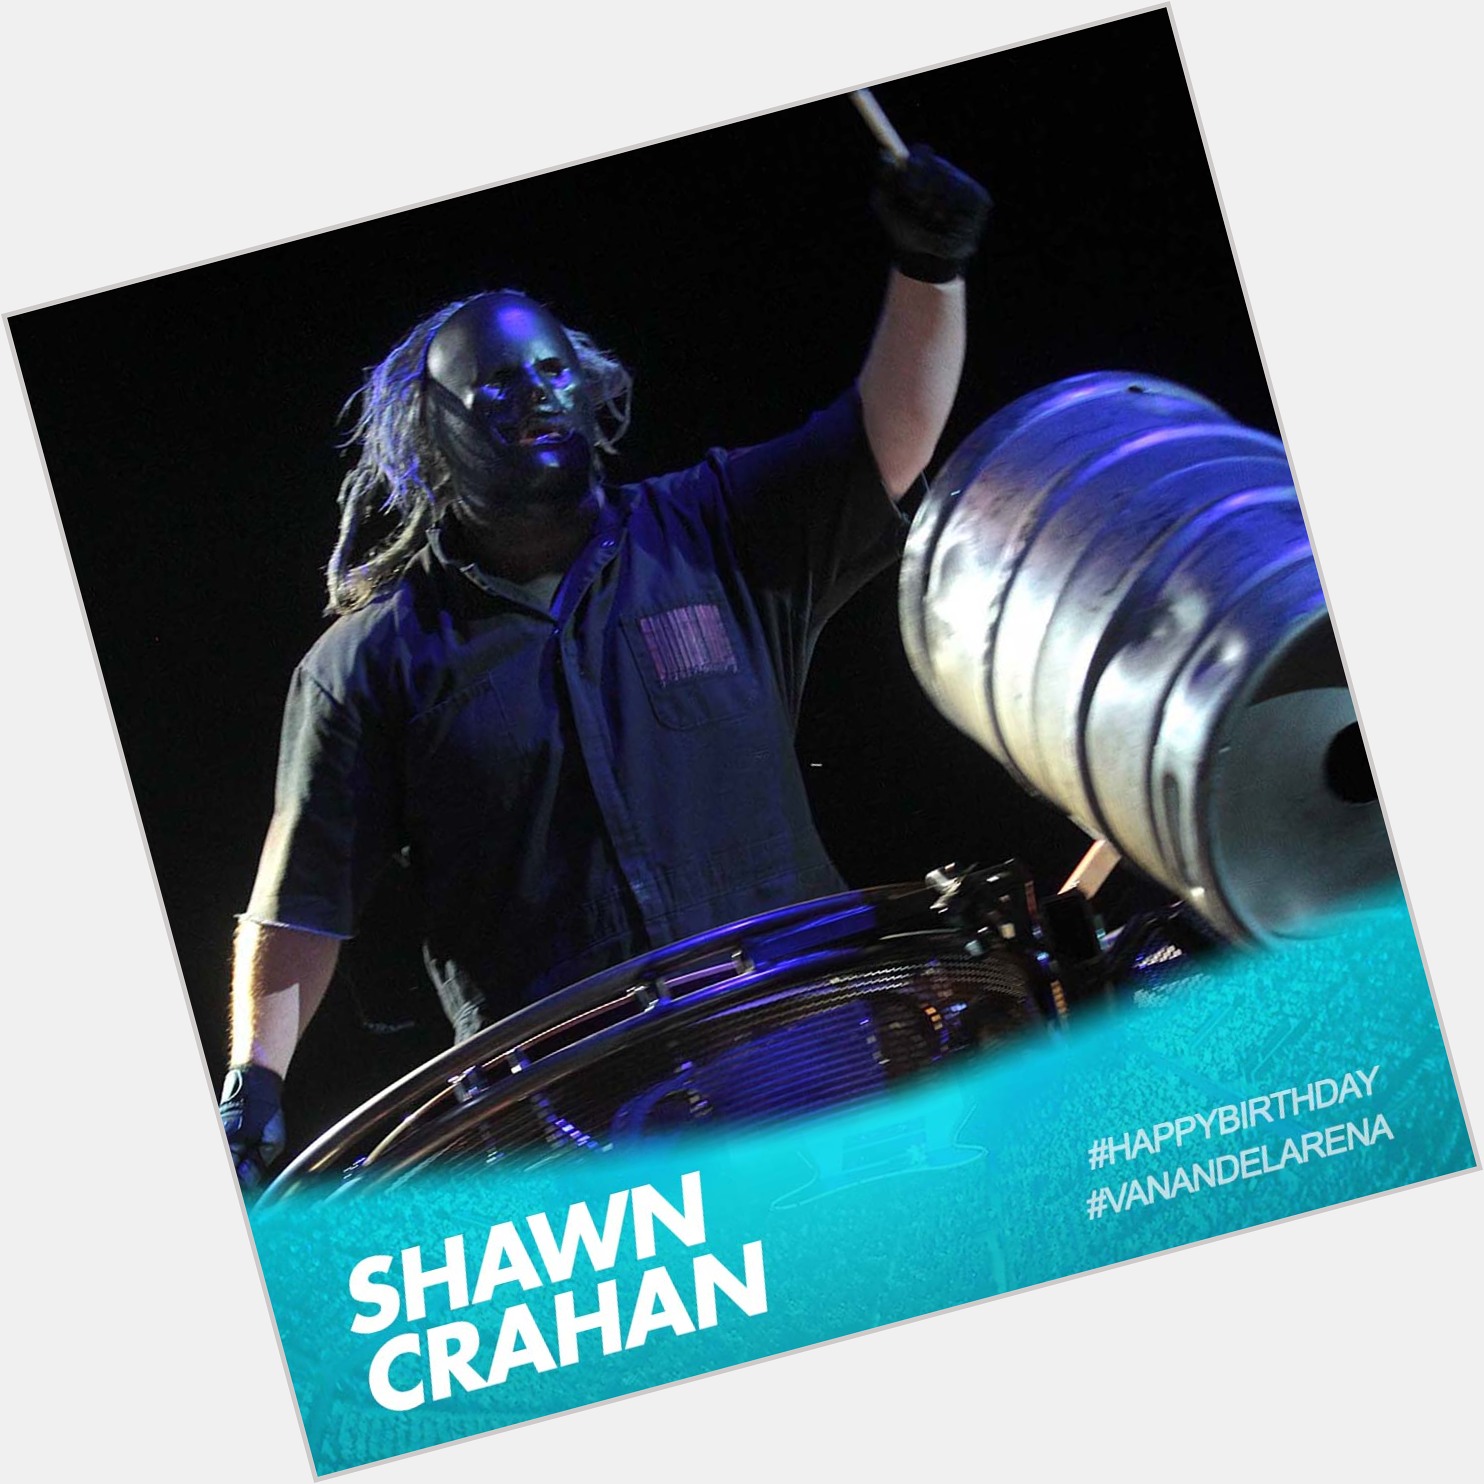 Happy birthday to Shawn Crahan of    by Jim Hill from 2015 tour at 